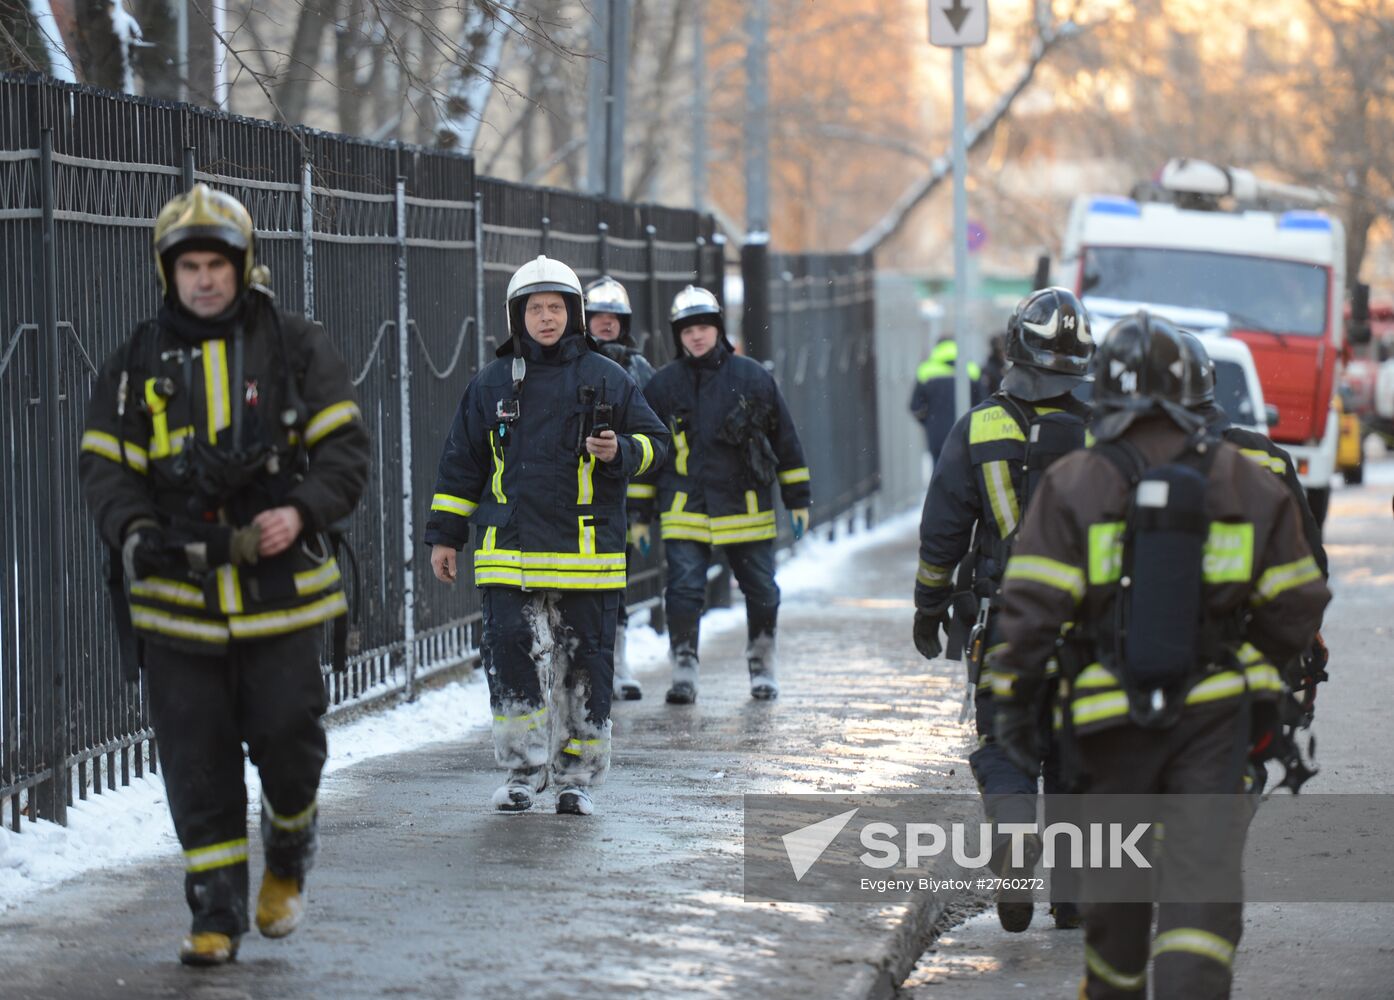 Fire at Cultural Center of Russian Ministry of Internal Affairs Main Directorate